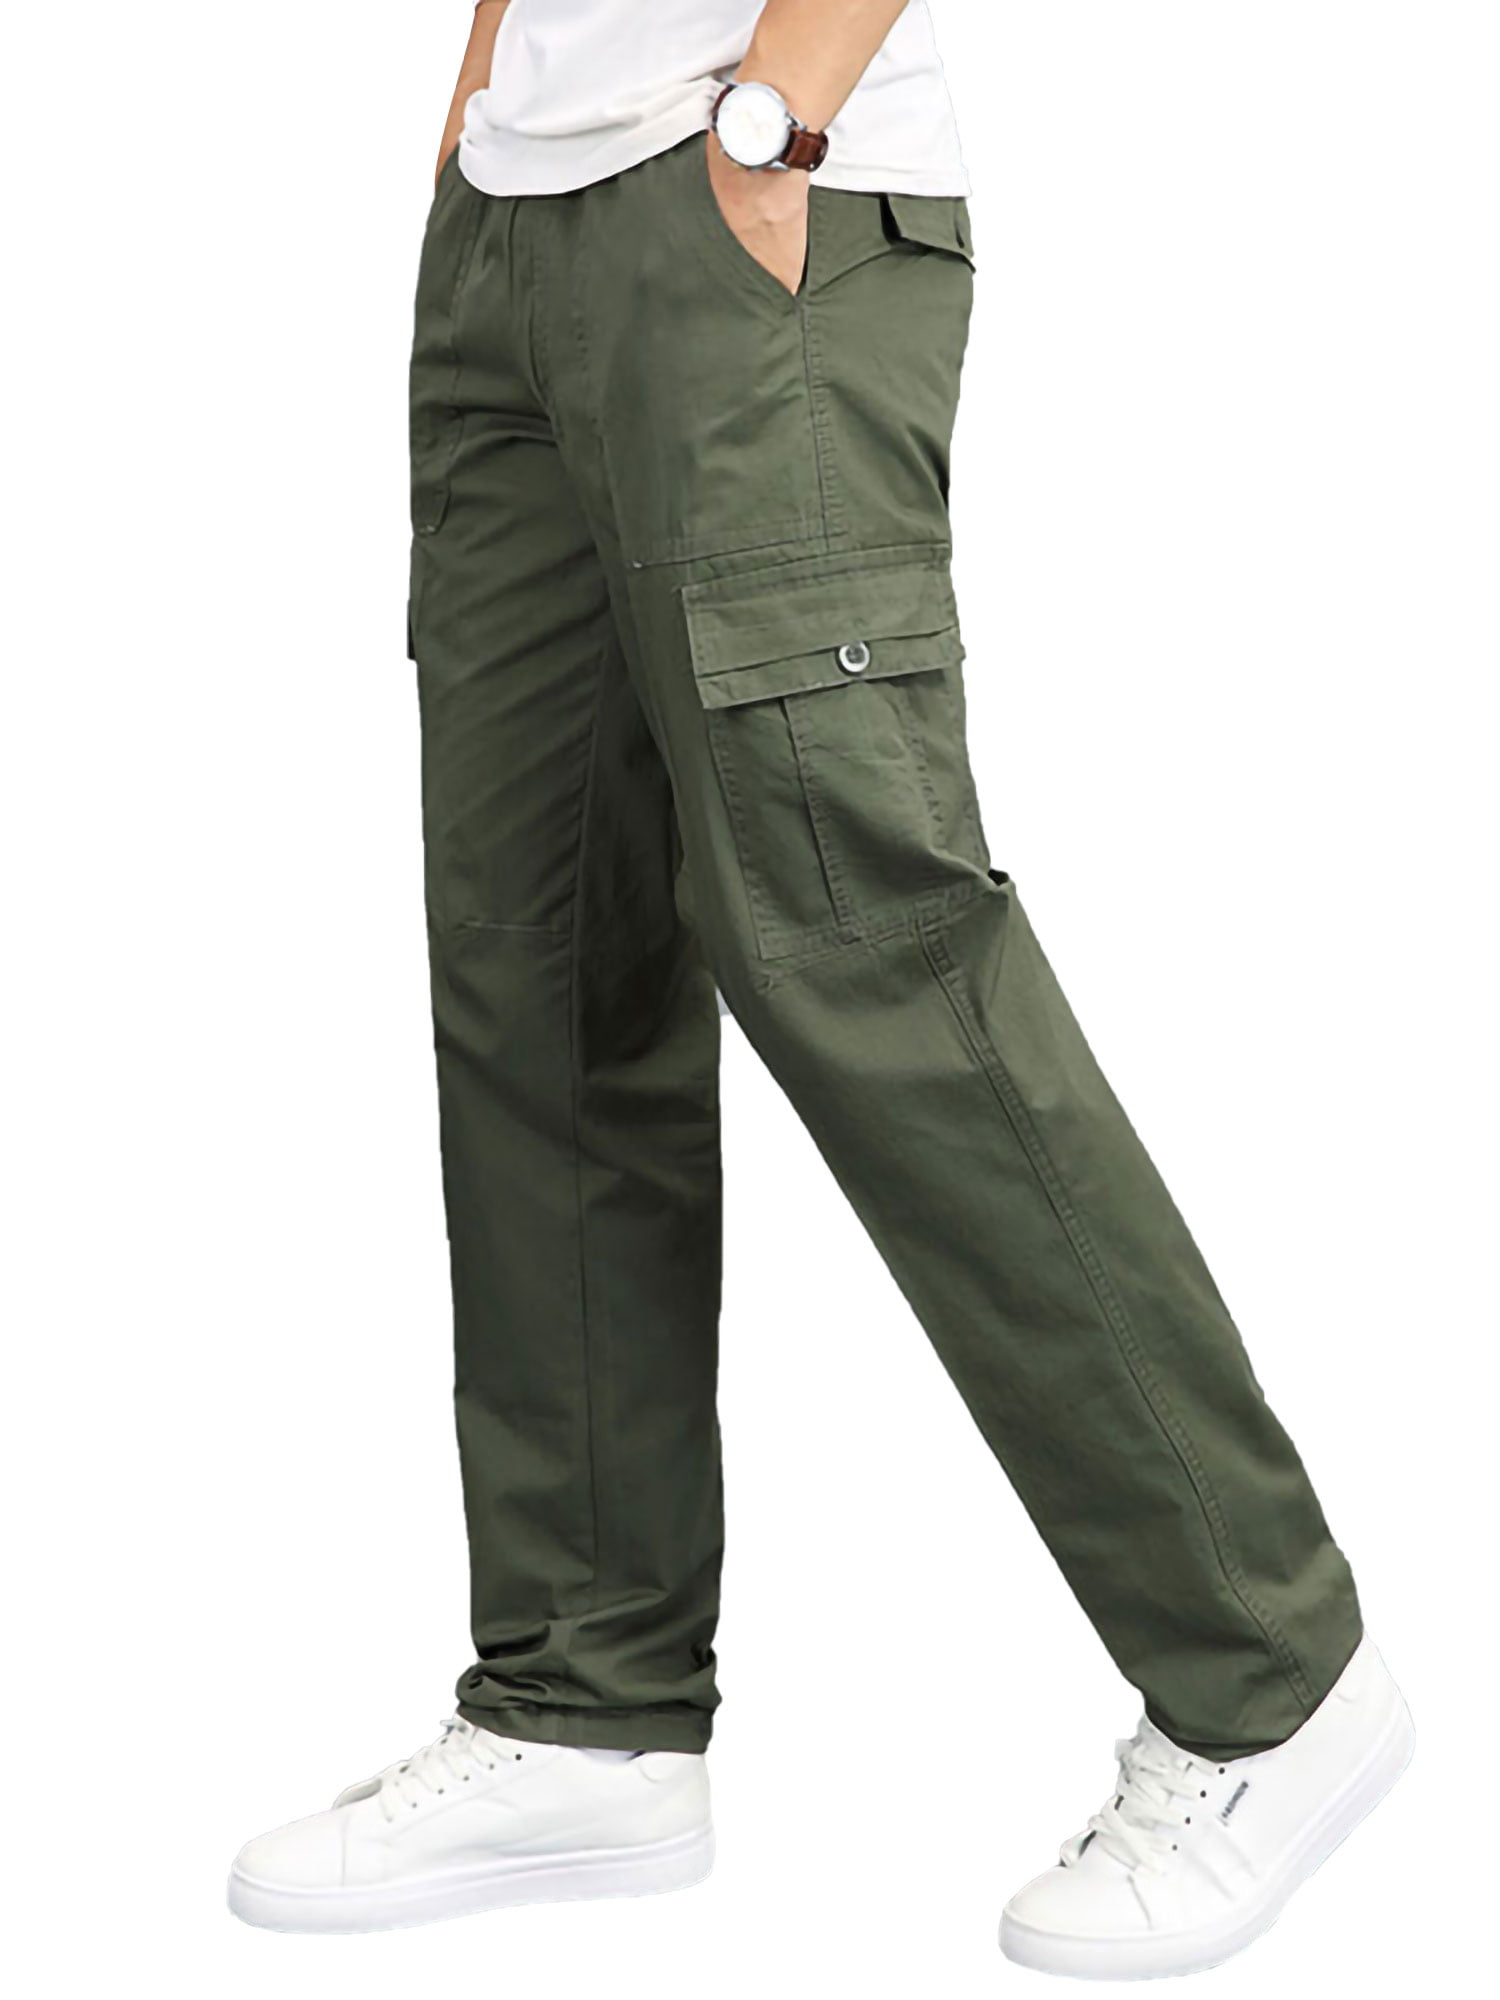 Man Shell Casual Hiking Trousers Tactical Combat Cargo Work Pants Outdoors 